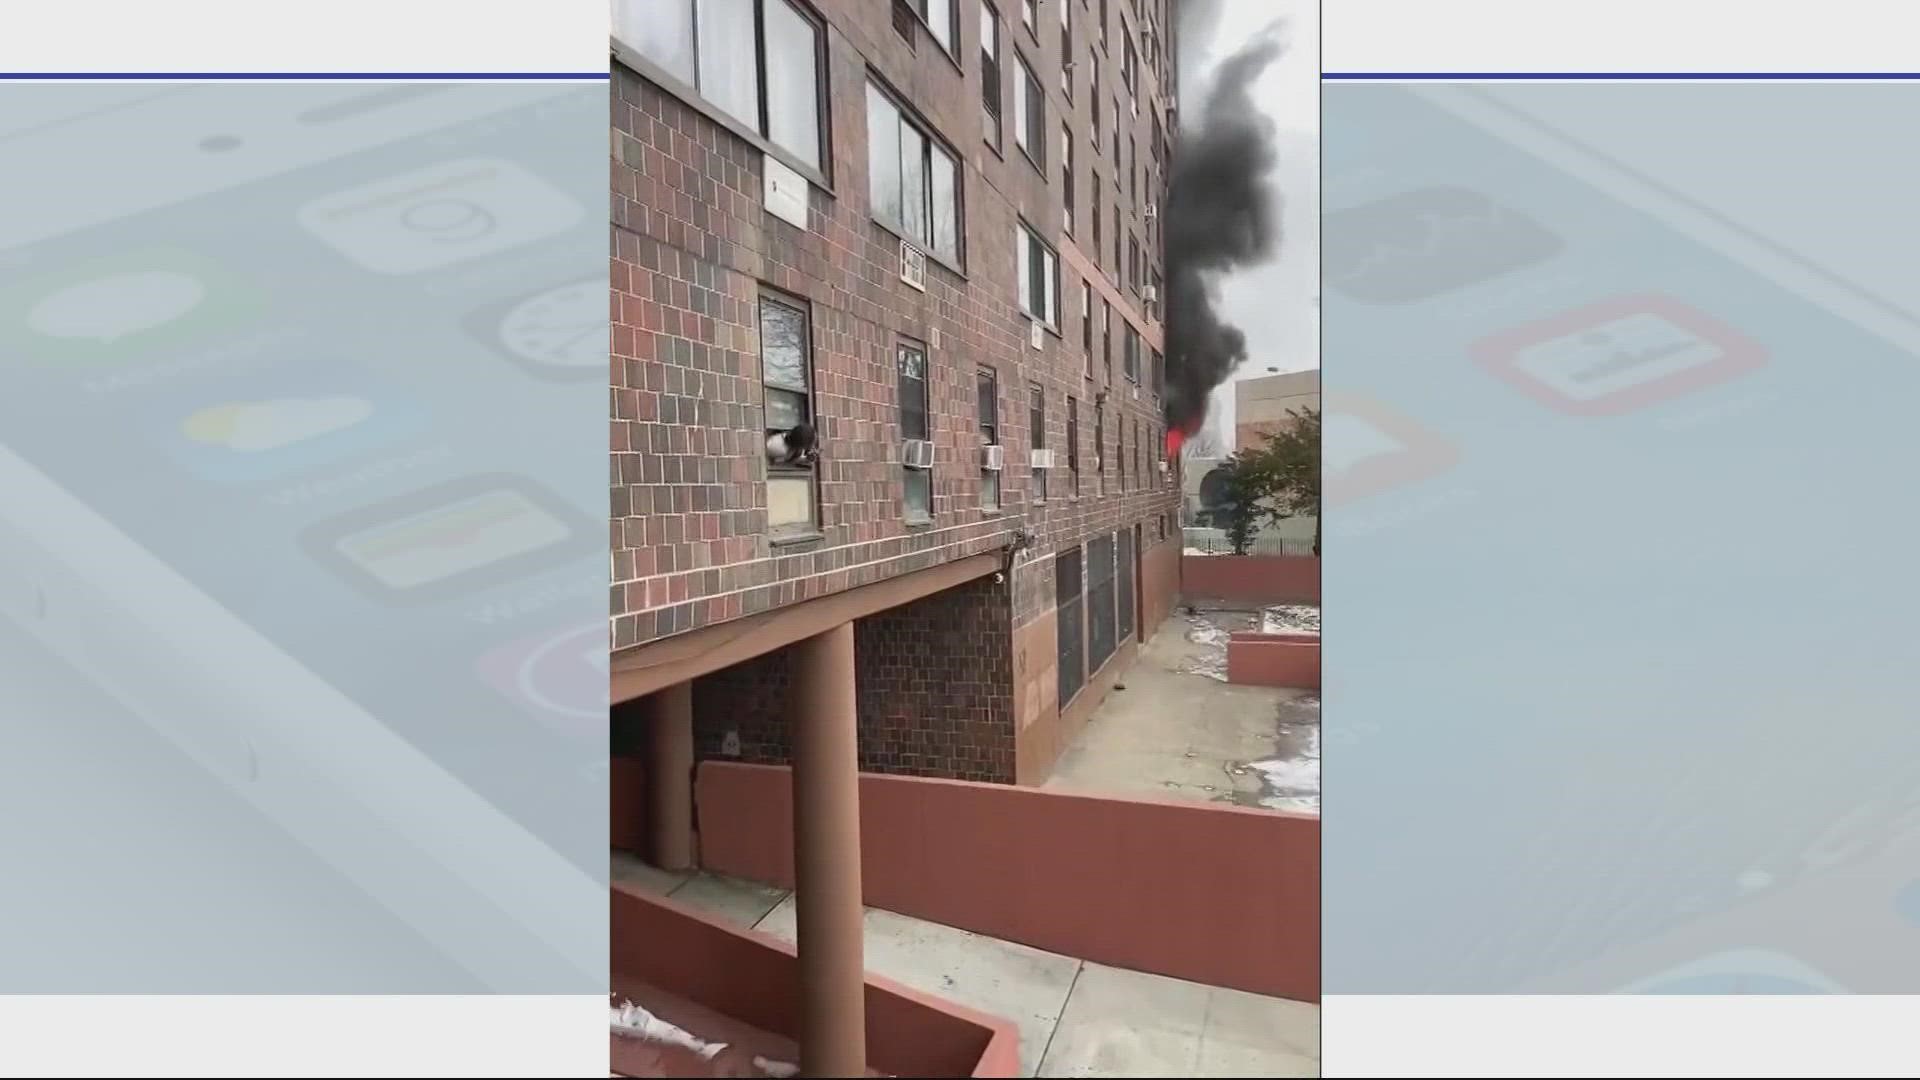 Fire Commissioner Daniel Nigro said the fire was caused by a malfunctioning space heater.